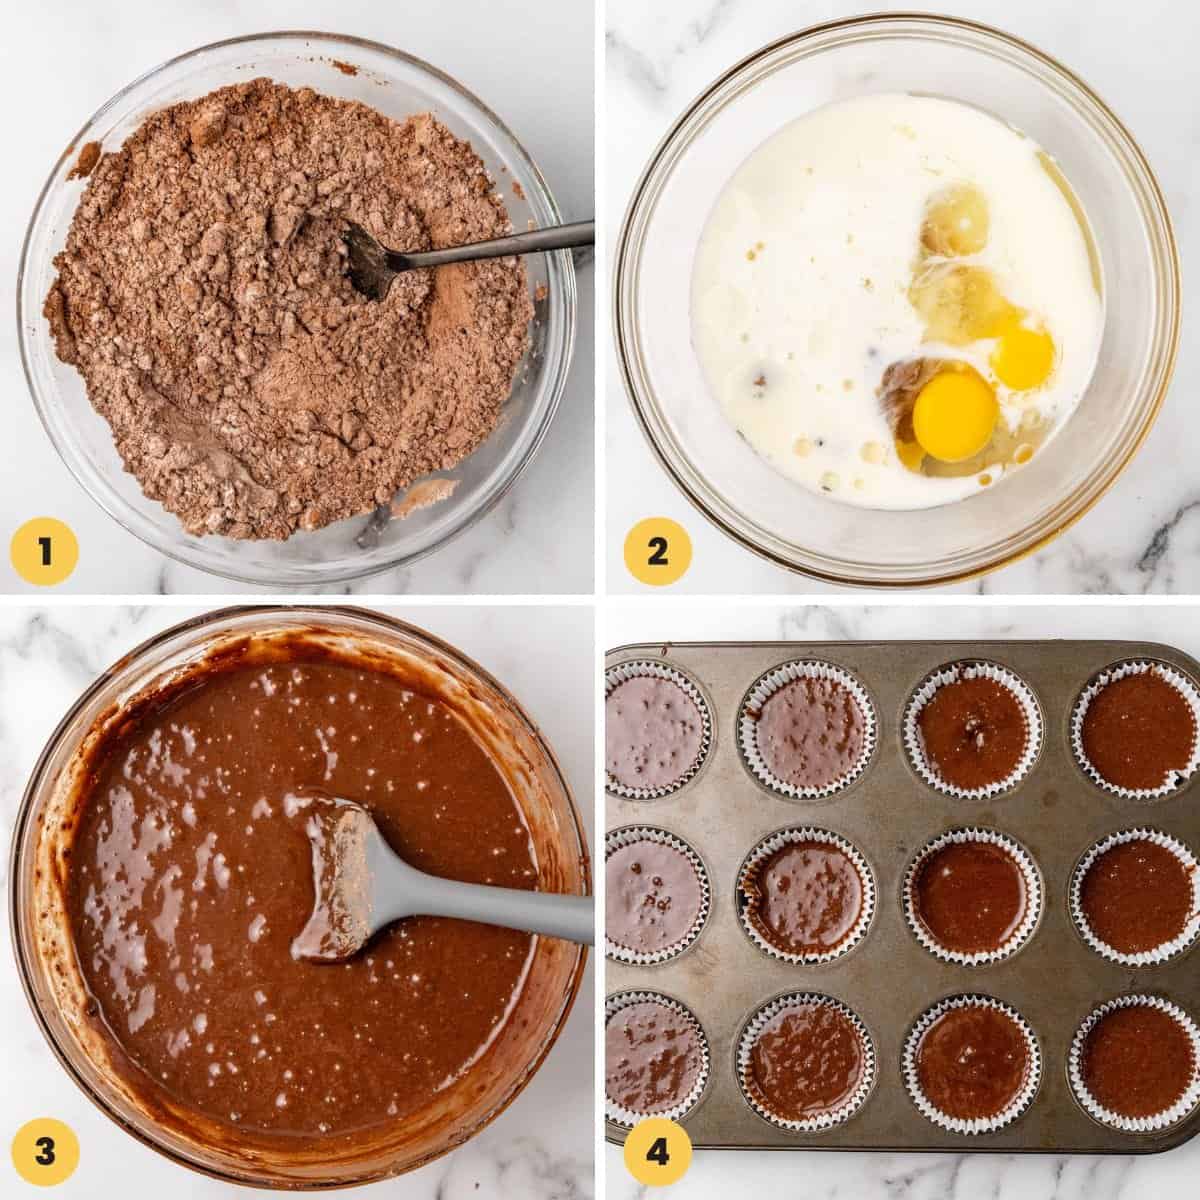 Collage of four images showing how to make chocolate cupcakes